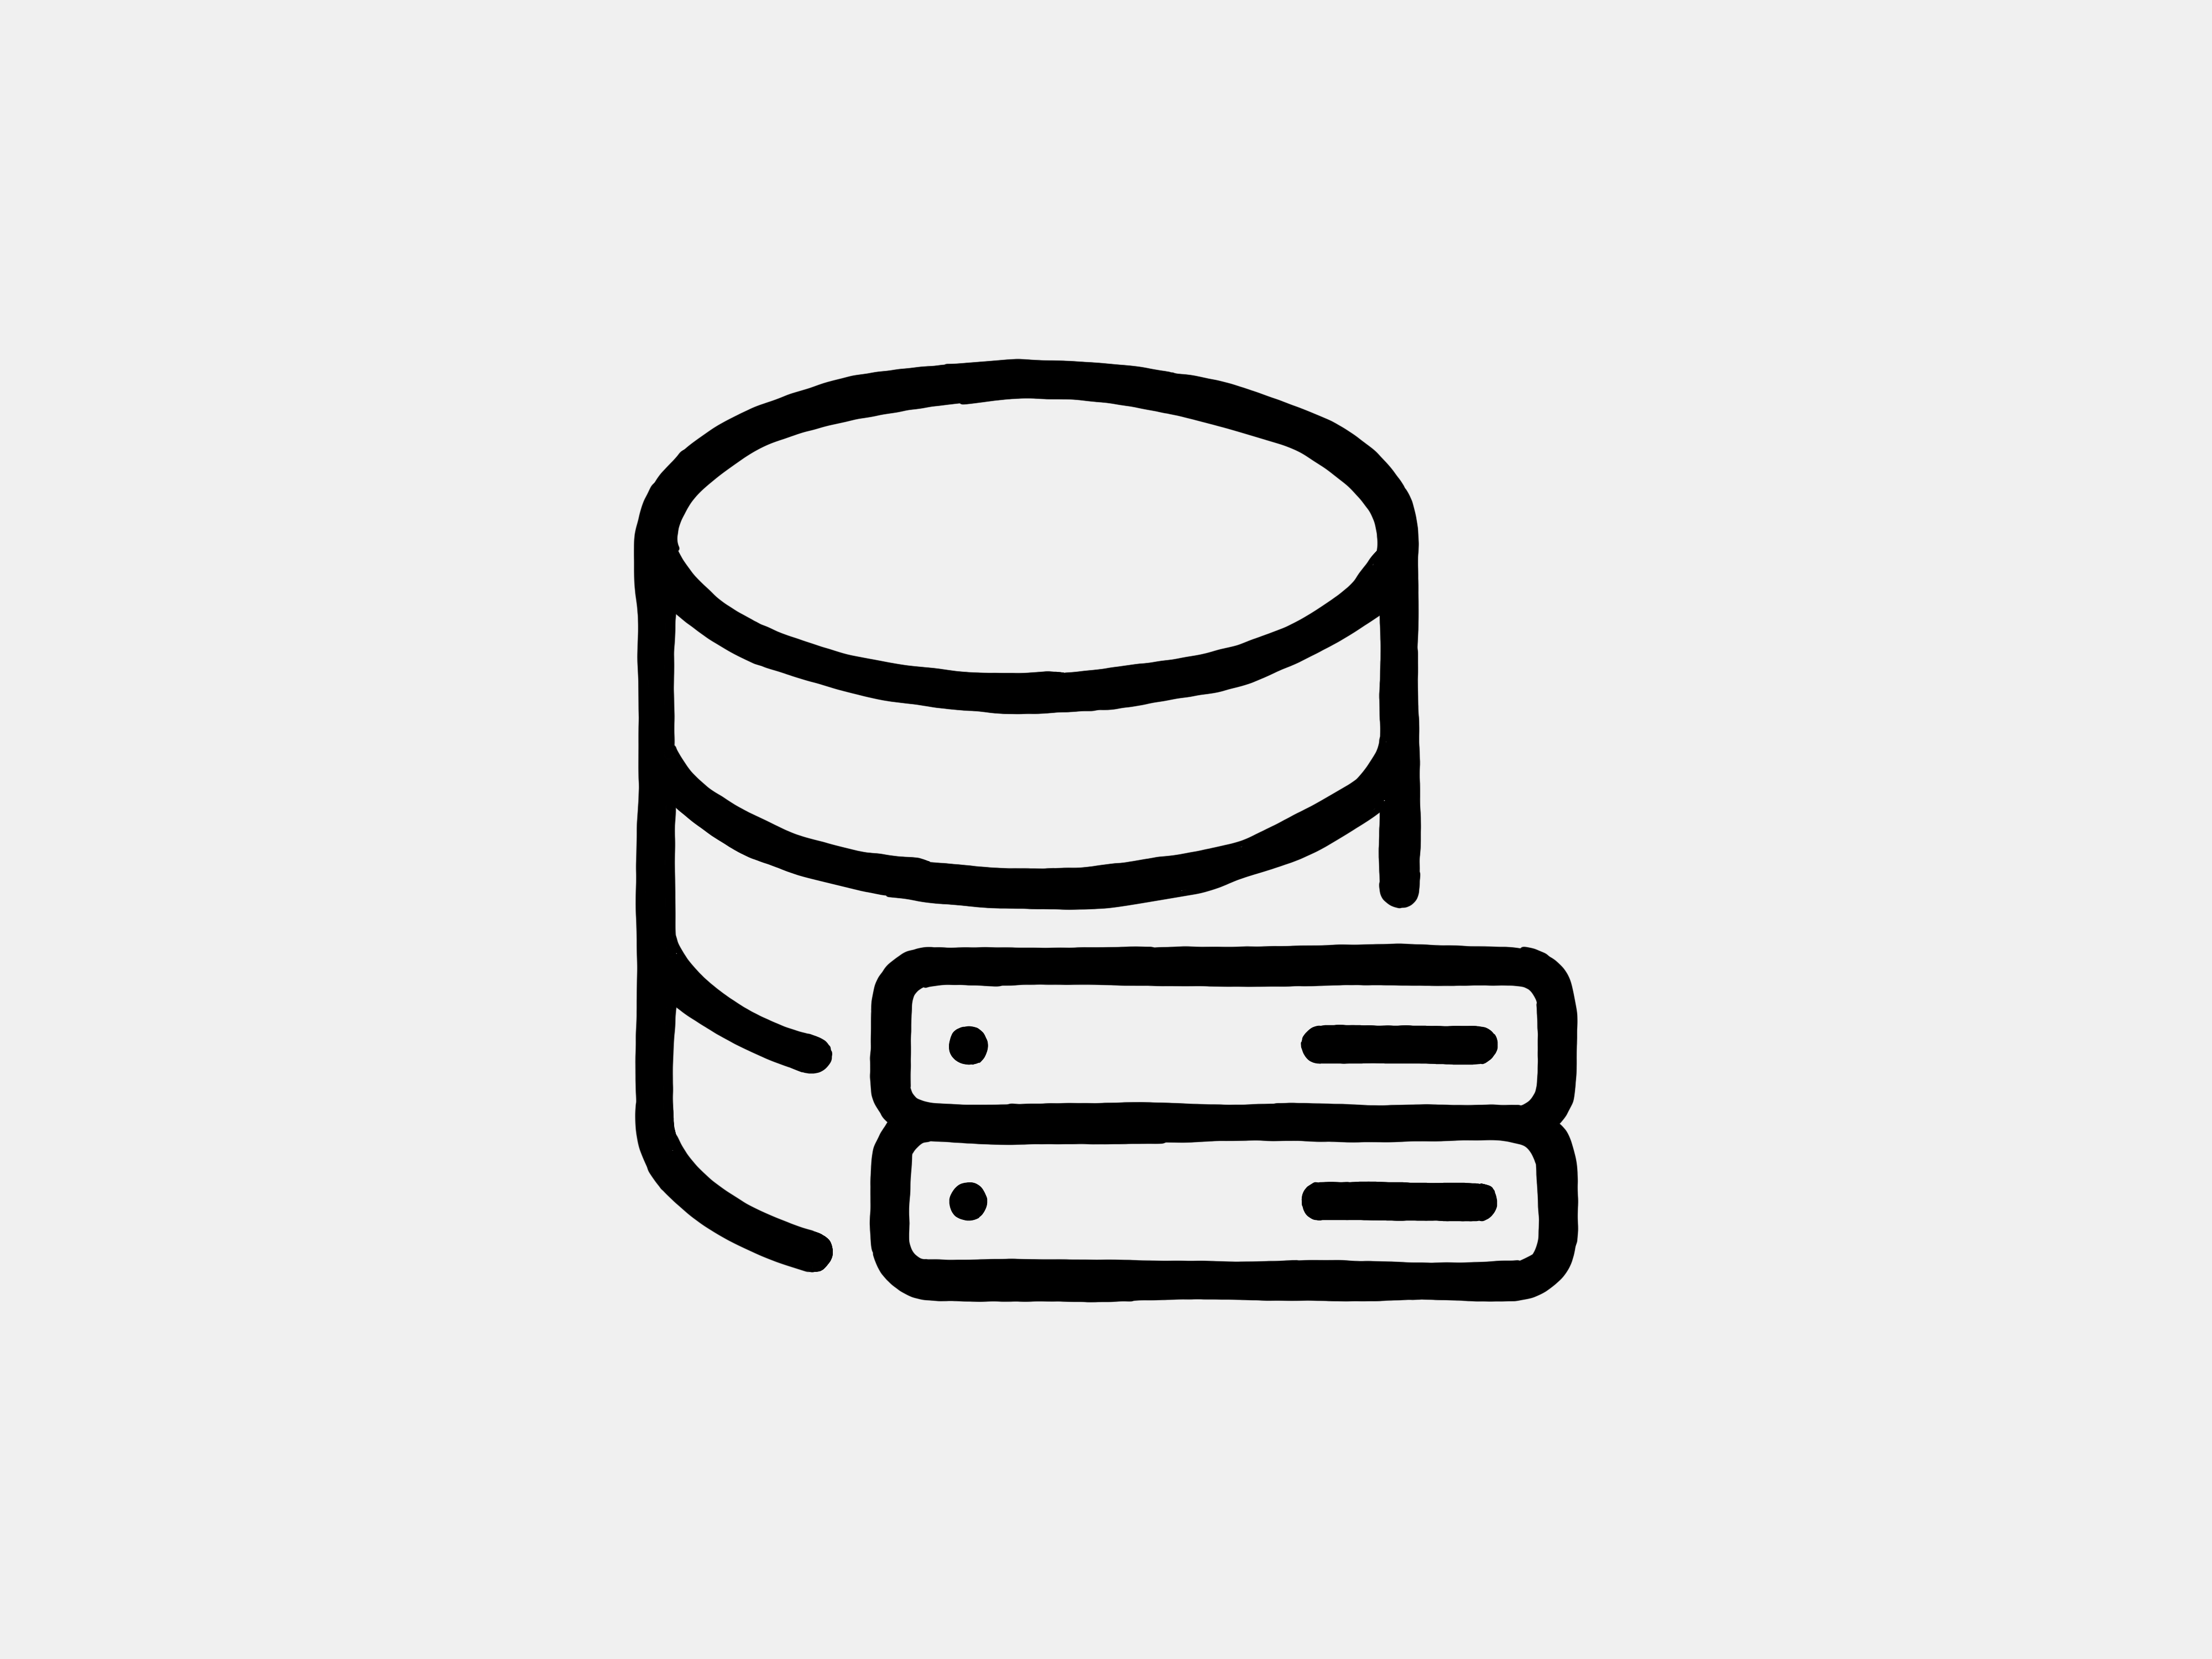 An illustration of a database icon.